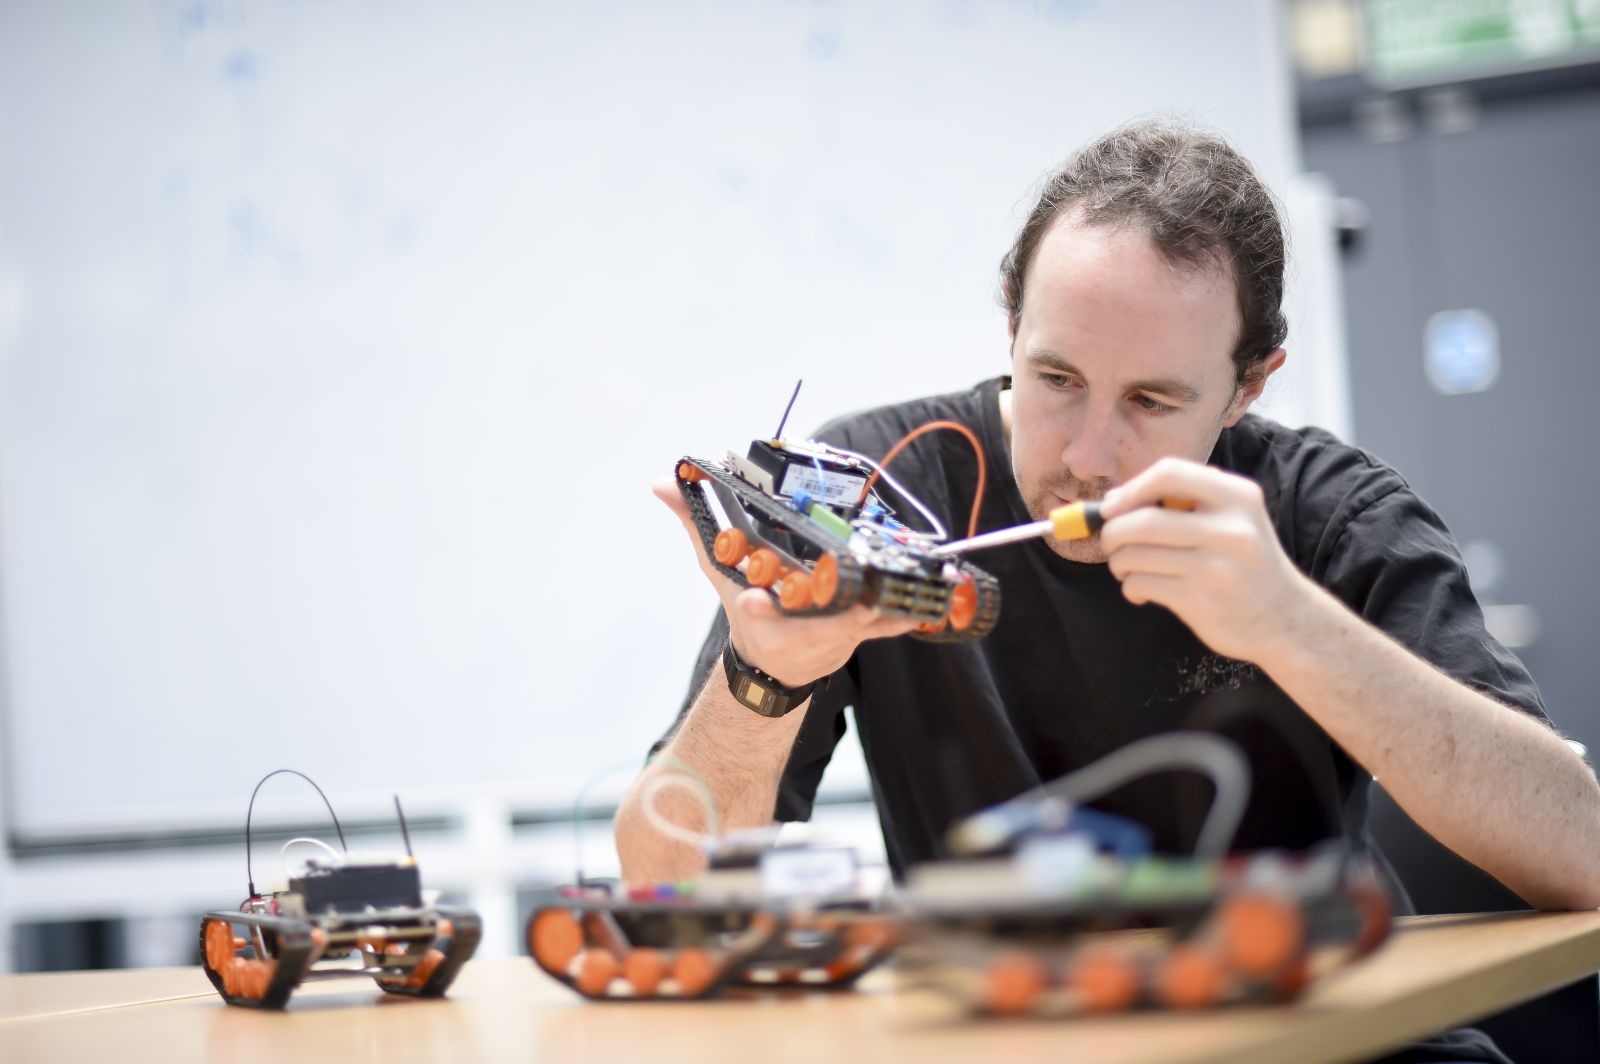 A PhD student works on mini-robots for his robotics project at the University of Sussex